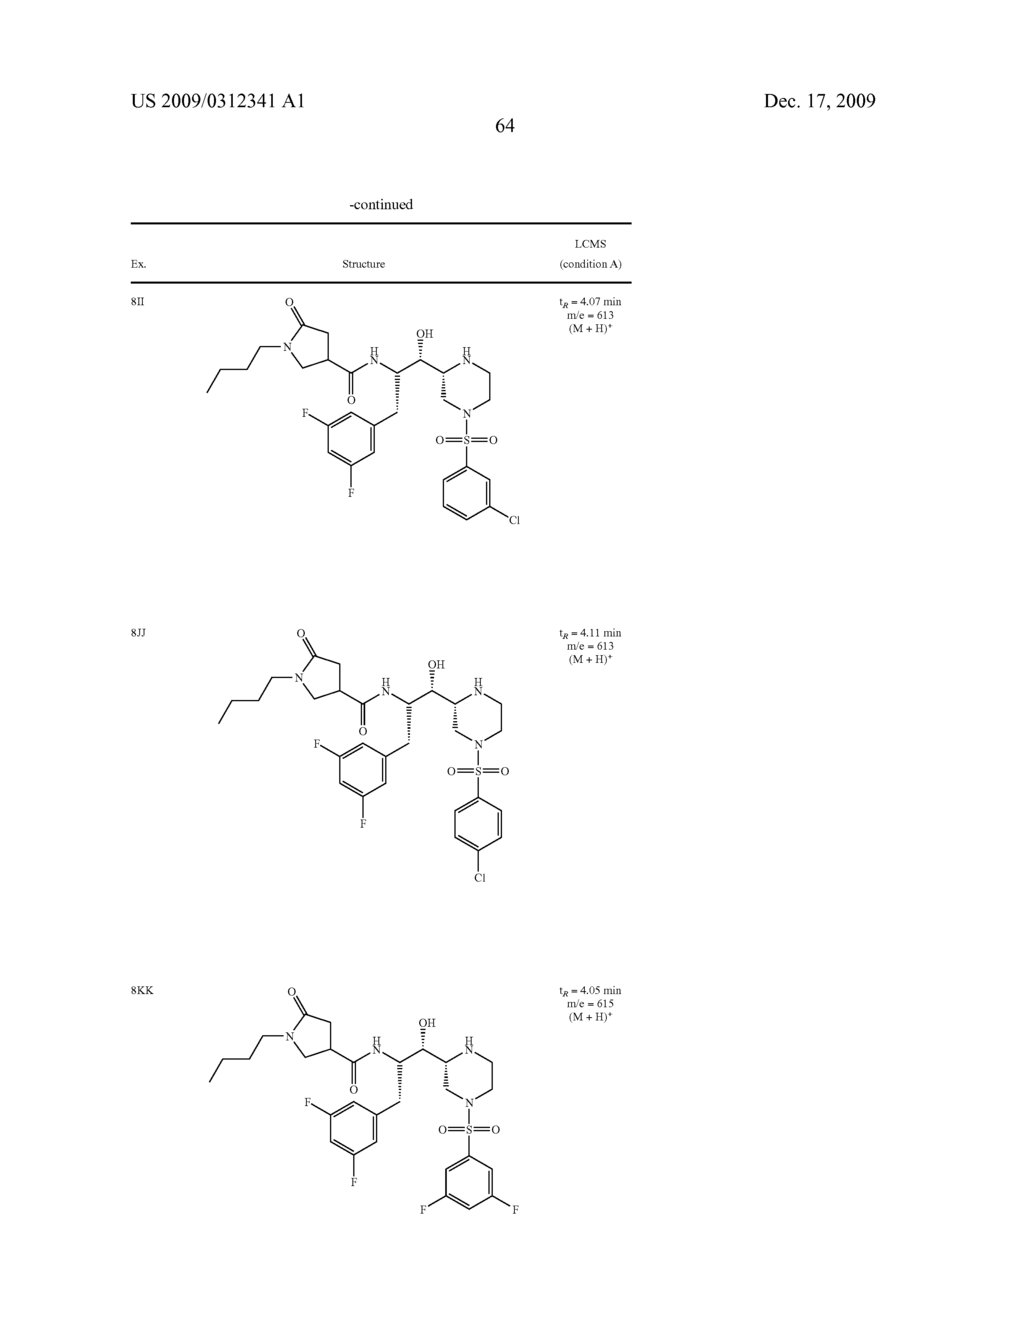 CYCLIC AMINE BACE-1 INHIBITORS HAVING A HETEROCYCLIC SUBSTITUENT - diagram, schematic, and image 65